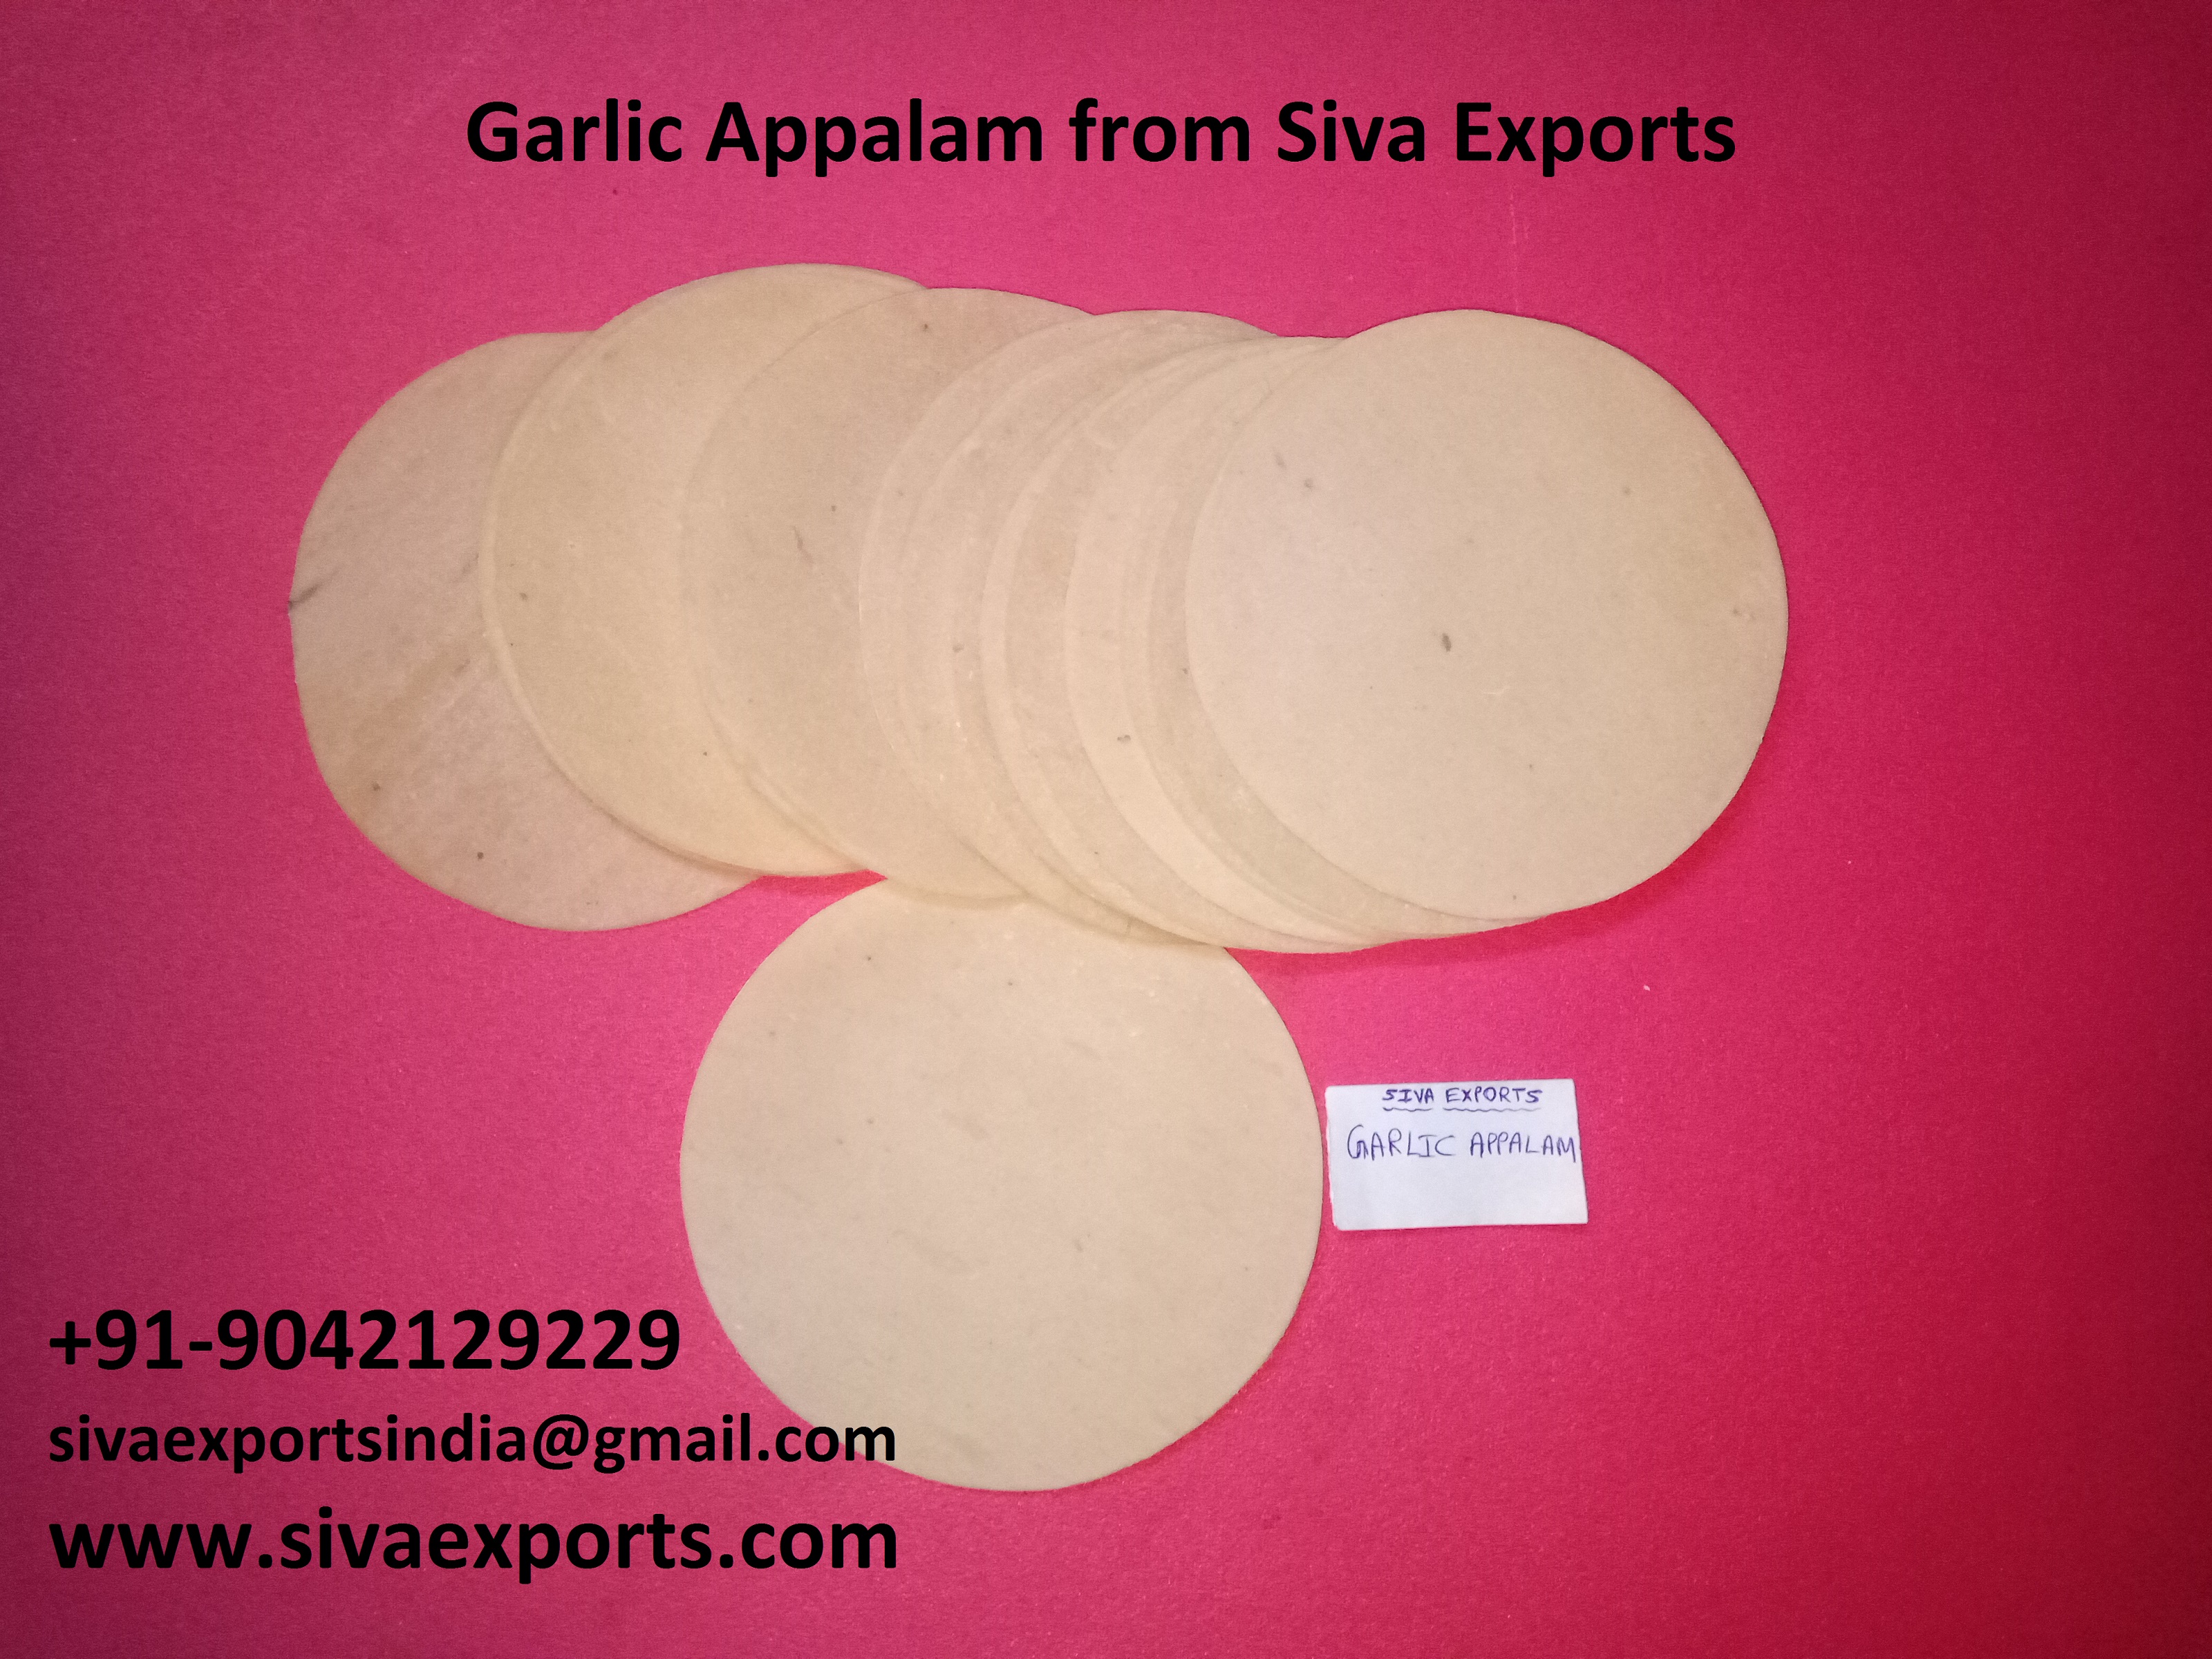 appalam manufacturers in india, papad manufacturers in india, appalam manufacturers in tamilnadu, papad manufacturers in tamilnadu, appalam manufacturers in madurai, papad manufacturers in madurai, appalam exporters in india, papad exporters in india, appalam exporters in tamilnadu, papad exporters in tamilnadu, appalam exporters in madurai, papad exporters in madurai, appalam wholesalers in india, papad wholesalers in india, appalam wholesalers in tamilnadu, papad wholesalers in tamilnadu, appalam wholesalers in madurai, papad wholesalers in madurai, appalam distributors in india, papad distributors in india, appalam distributors in tamilnadu, papad distributors in tamilnadu, appalam distributors in madurai, papad distributors in madurai, appalam suppliers in india, papad suppliers in india, appalam suppliers in tamilnadu, papad suppliers in tamilnadu, appalam suppliers in madurai, papad suppliers in madurai, appalam dealers in india, papad dealers in india, appalam dealers in tamilnadu, papad dealers in tamilnadu, appalam dealers in madurai, papad dealers in madurai, appalam companies in india, appalam companies in tamilnadu, appalam companies in madurai, papad companies in india, papad companies in tamilnadu, papad companies in madurai, appalam company in india, appalam company in tamilnadu, appalam company in madurai, papad company in india, papad company in tamilnadu, papad company in madurai, appalam factory in india, appalam factory in tamilnadu, appalam factory in madurai, papad factory in india, papad factory in tamilnadu, papad factory in madurai, appalam factories in india, appalam factories in tamilnadu, appalam factories in madurai, papad factories in india, papad factories in tamilnadu, papad factories in madurai, appalam production units in india, appalam production units in tamilnadu, appalam production units in madurai, papad production units in india, papad production units in tamilnadu, papad production units in madurai, pappadam manufacturers in india, poppadom manufacturers in india, pappadam manufacturers in tamilnadu, poppadom manufacturers in tamilnadu, pappadam manufacturers in madurai, poppadom manufacturers in madurai, appalam manufacturers, papad manufacturers, pappadam manufacturers, pappadum exporters in india, pappadam exporters in india, poppadom exporters in india, pappadam exporters in tamilnadu, pappadum exporters in tamilnadu, poppadom exporters in tamilnadu, pappadum exporters in madurai, pappadam exporters in madurai, poppadom exporters in Madurai, pappadum wholesalers in madurai, pappadam wholesalers in madurai, poppadom wholesalers in Madurai, pappadum wholesalers in tamilnadu, pappadam wholesalers in tamilnadu, poppadom wholesalers in Tamilnadu, pappadam wholesalers in india, poppadom wholesalers in india, pappadum wholesalers in india, appalam retailers in india, papad retailers in india, appalam retailers in tamilnadu, papad retailers in tamilnadu, appalam retailers in madurai, papad retailers in Madurai, appalam, papad, Siva Exports, Orange Appalam, Orange Papad, Lion Brand Appalam, Siva Appalam, Lion brand Papad, Sivan Appalam, Orange Pappadam, appalam, papad, papadum, papadam, papadom, pappad, pappadum, pappadam, pappadom, poppadom, popadom, poppadam, popadam, poppadum, popadum, appalam manufacturers, papad manufacturers, papadum manufacturers, papadam manufacturers, pappadam manufacturers, pappad manufacturers, pappadum manufacturers, pappadom manufacturers, poppadom manufacturers, papadom manufacturers, popadom manufacturers, poppadum manufacturers, popadum manufacturers, popadam manufacturers, poppadam manufacturers, cumin appalam, red chilli appalam, green chilli appalam, pepper appalam, garmic appalam, calcium appalam, plain appalam manufacturers in india,tamilnadu,madurai, Appalam manufacturers in Andaman and Nicobar Islands, Best Appalam manufacturers in Andaman and Nicobar Islands, No.1 Appalam manufacturers in Andaman and Nicobar Islands, Handmade Appalam manufacturers in Andaman and Nicobar Islands, Top 100 Appalam manufacturers in Andaman and Nicobar Islands, Leading Appalam manufacturers in Andaman and Nicobar Islands, Green Chilli Appalam manufacturers in Andaman and Nicobar Islands, Red Chilli Appalam manufacturers in Andaman and Nicobar Islands, Plain Appalam manufacturers in Andaman and Nicobar Islands, Cumin Appalam manufacturers in Andaman and Nicobar Islands, Pepper Appalam manufacturers in Andaman and Nicobar Islands, Garlic Appalam manufacturers in Andaman and Nicobar Islands, List of Appalam manufacturers in Andaman and Nicobar Islands, Papad Manufacturers in Andaman and Nicobar Islands